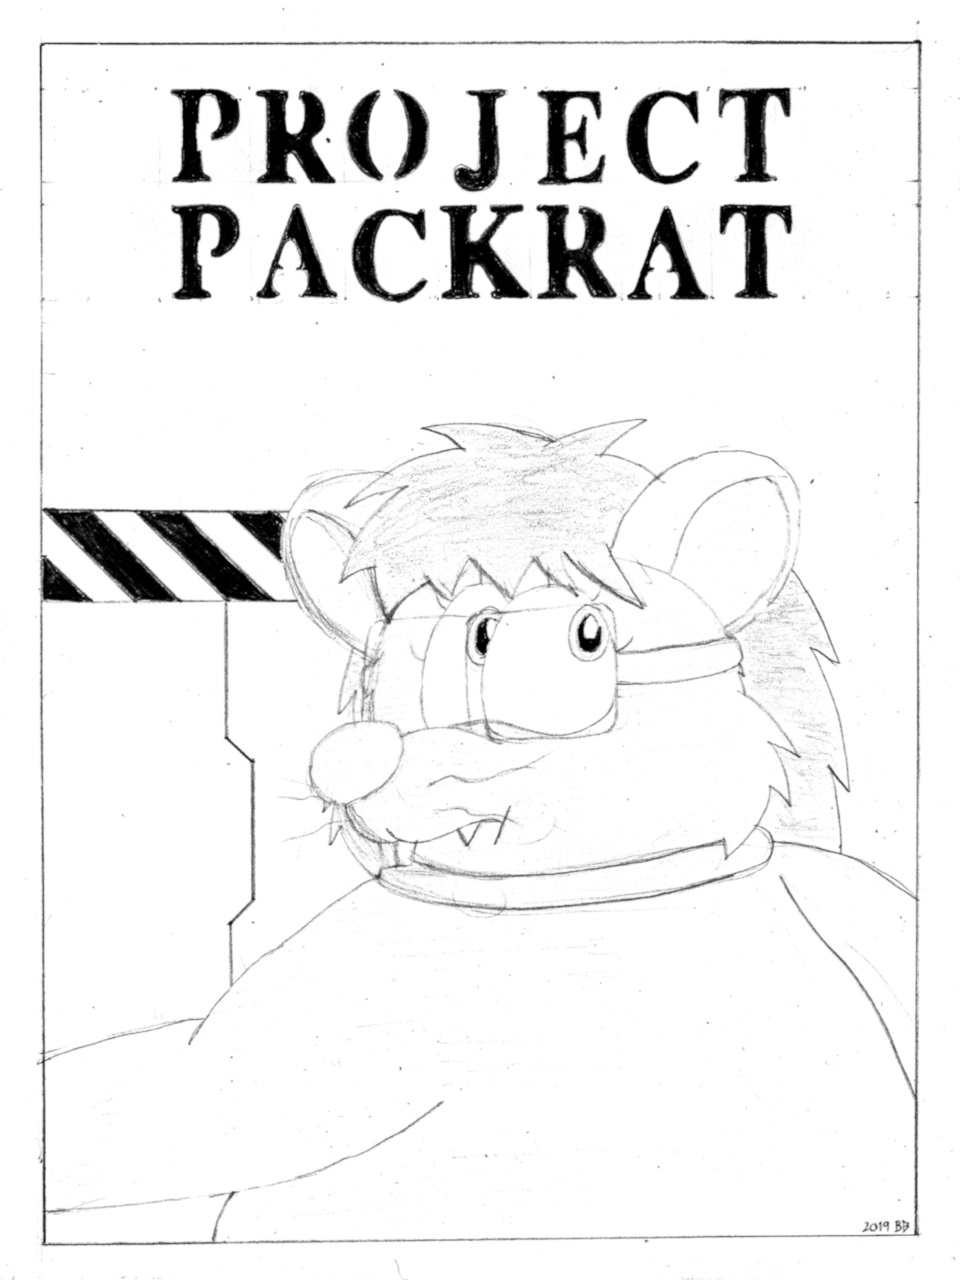 Project Packrat Comic Cover Concept